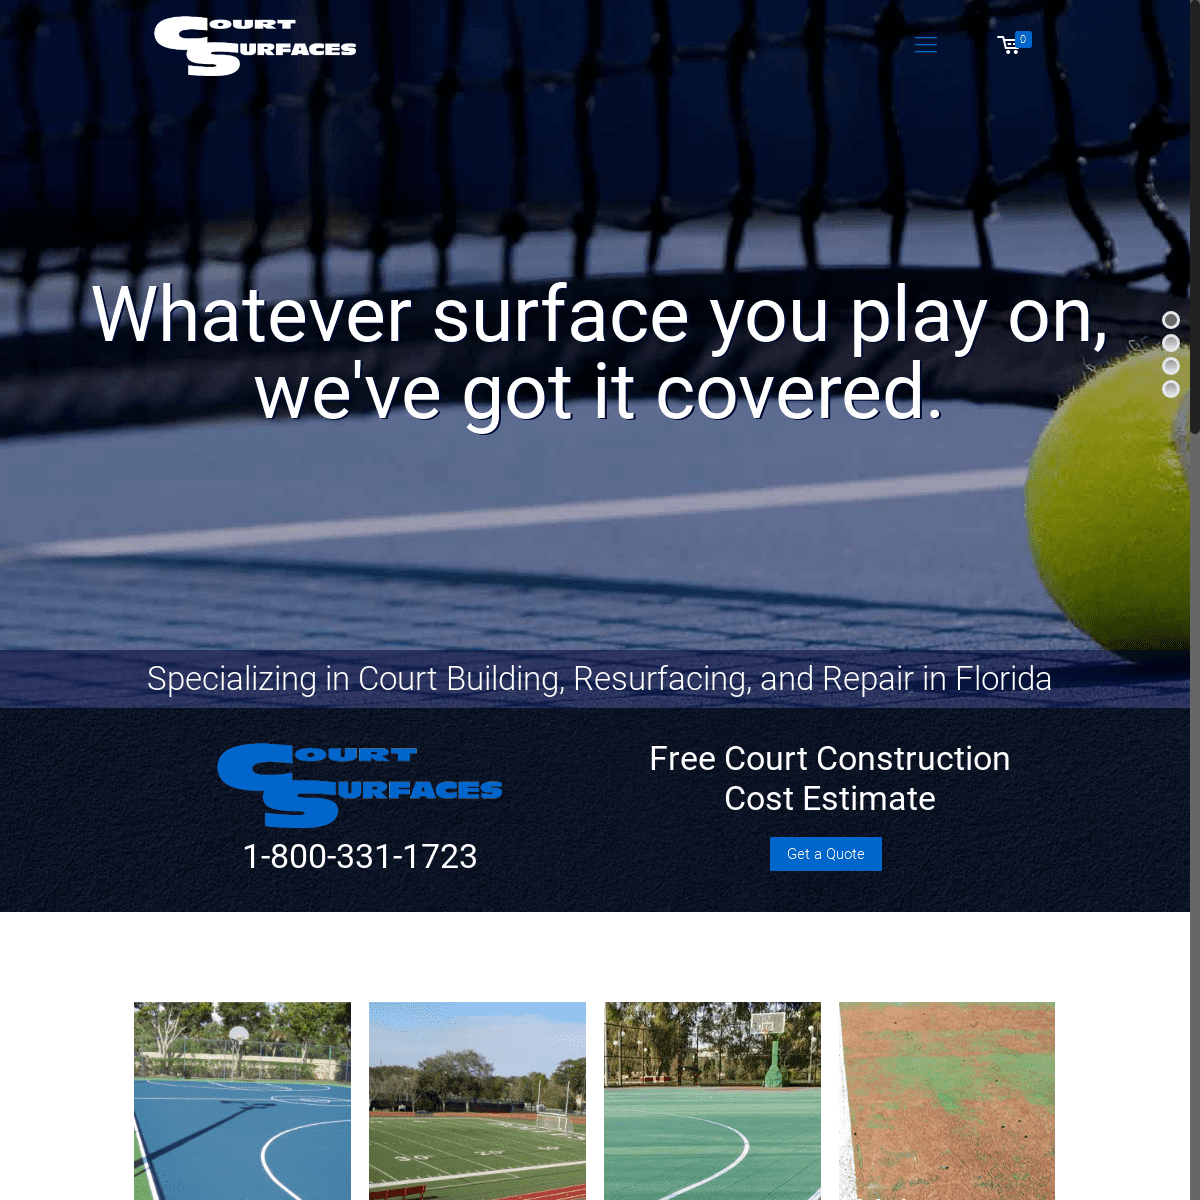 A complete backup of courtsurfacesfla.com